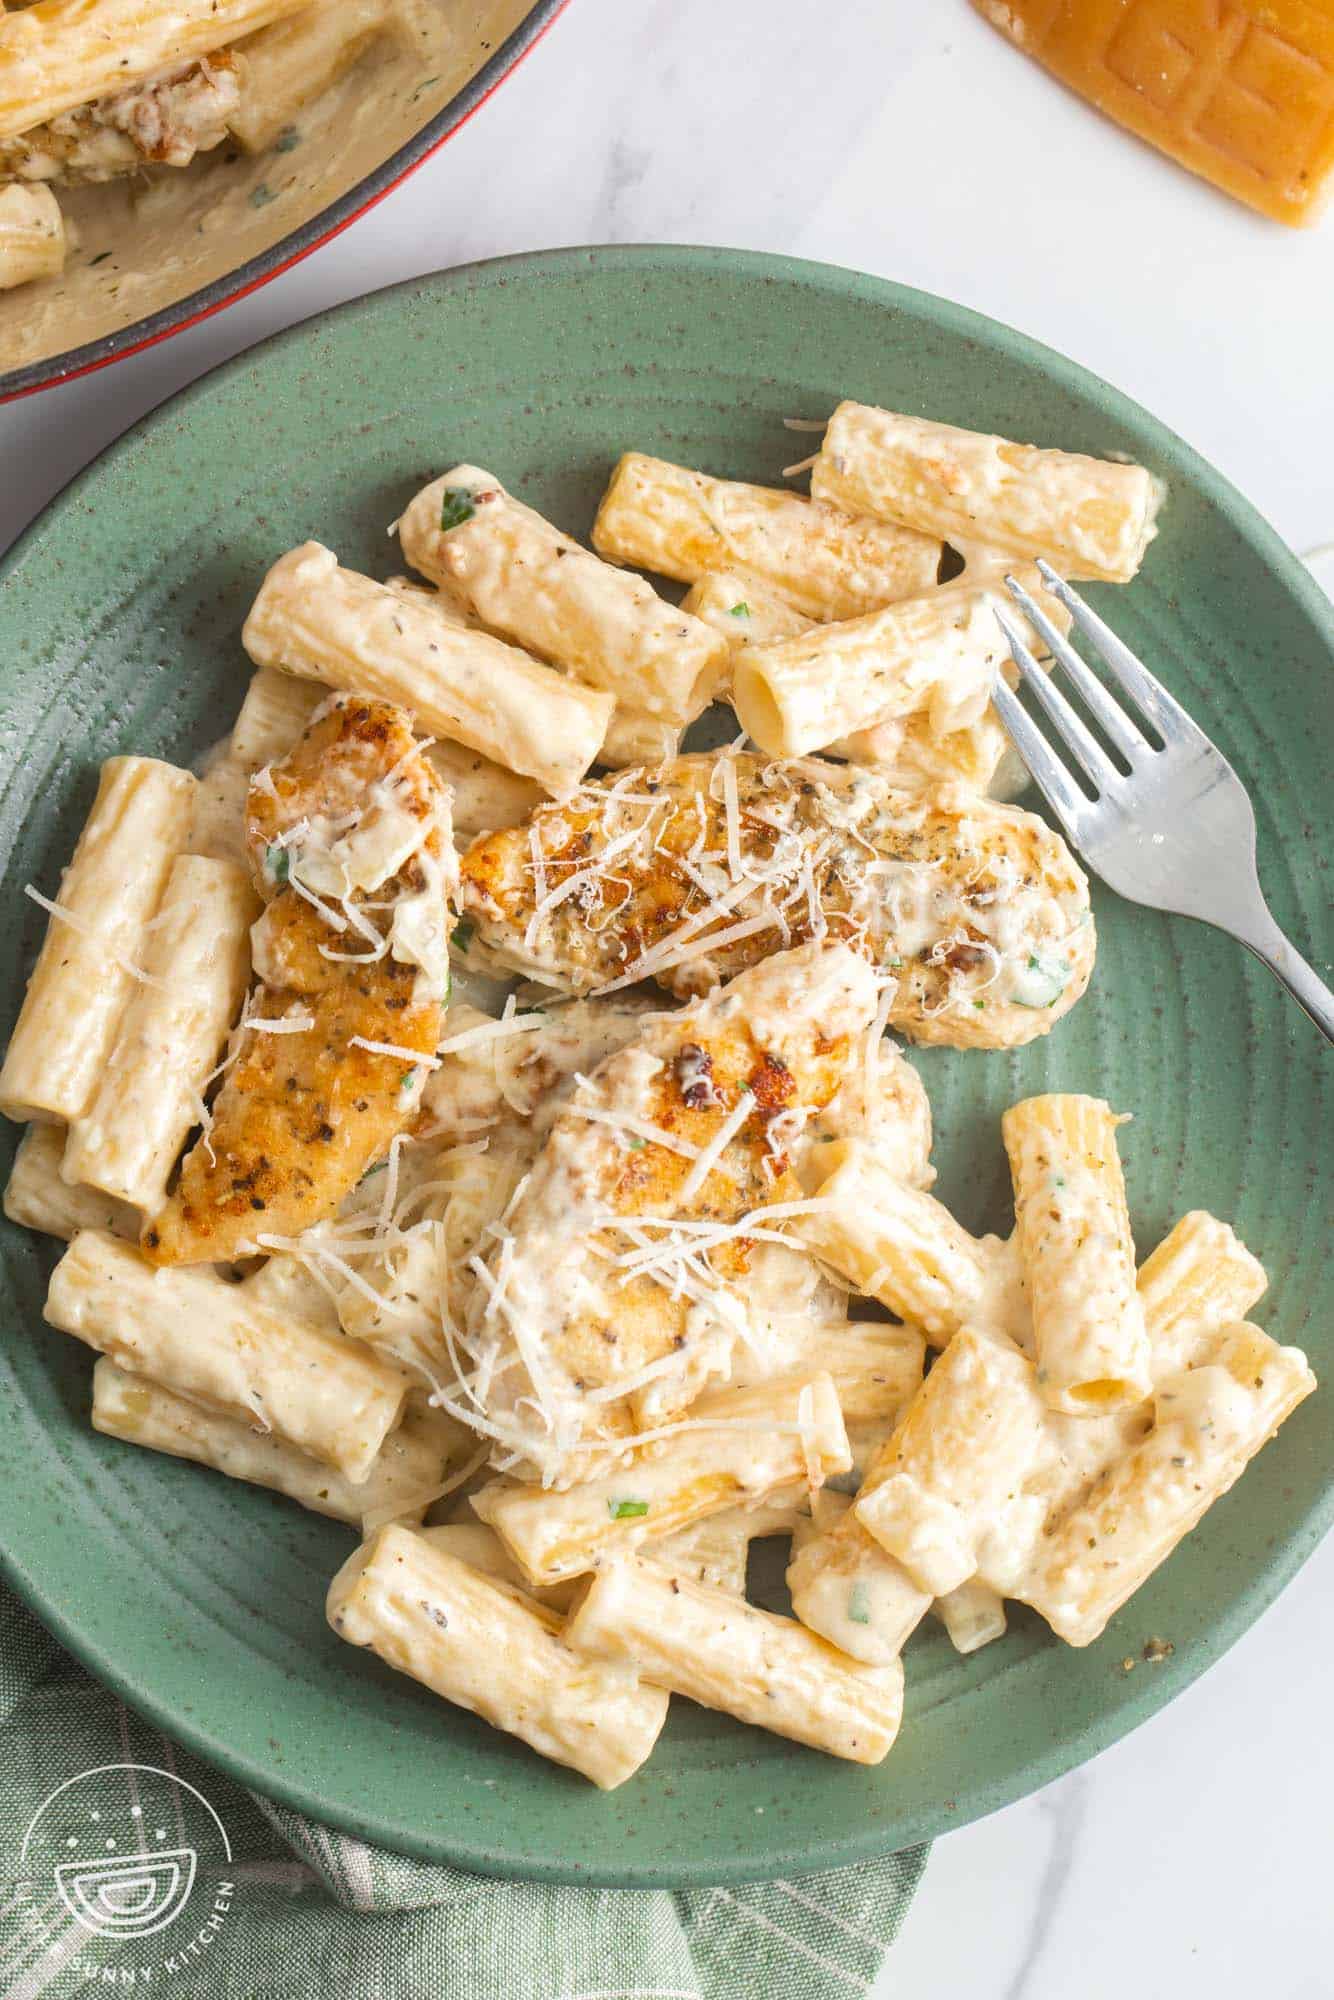 a green ceramic plate holding creamy parmesan tube pasta with three pieces of chicken, all topped with sauce and parmesan cheese.